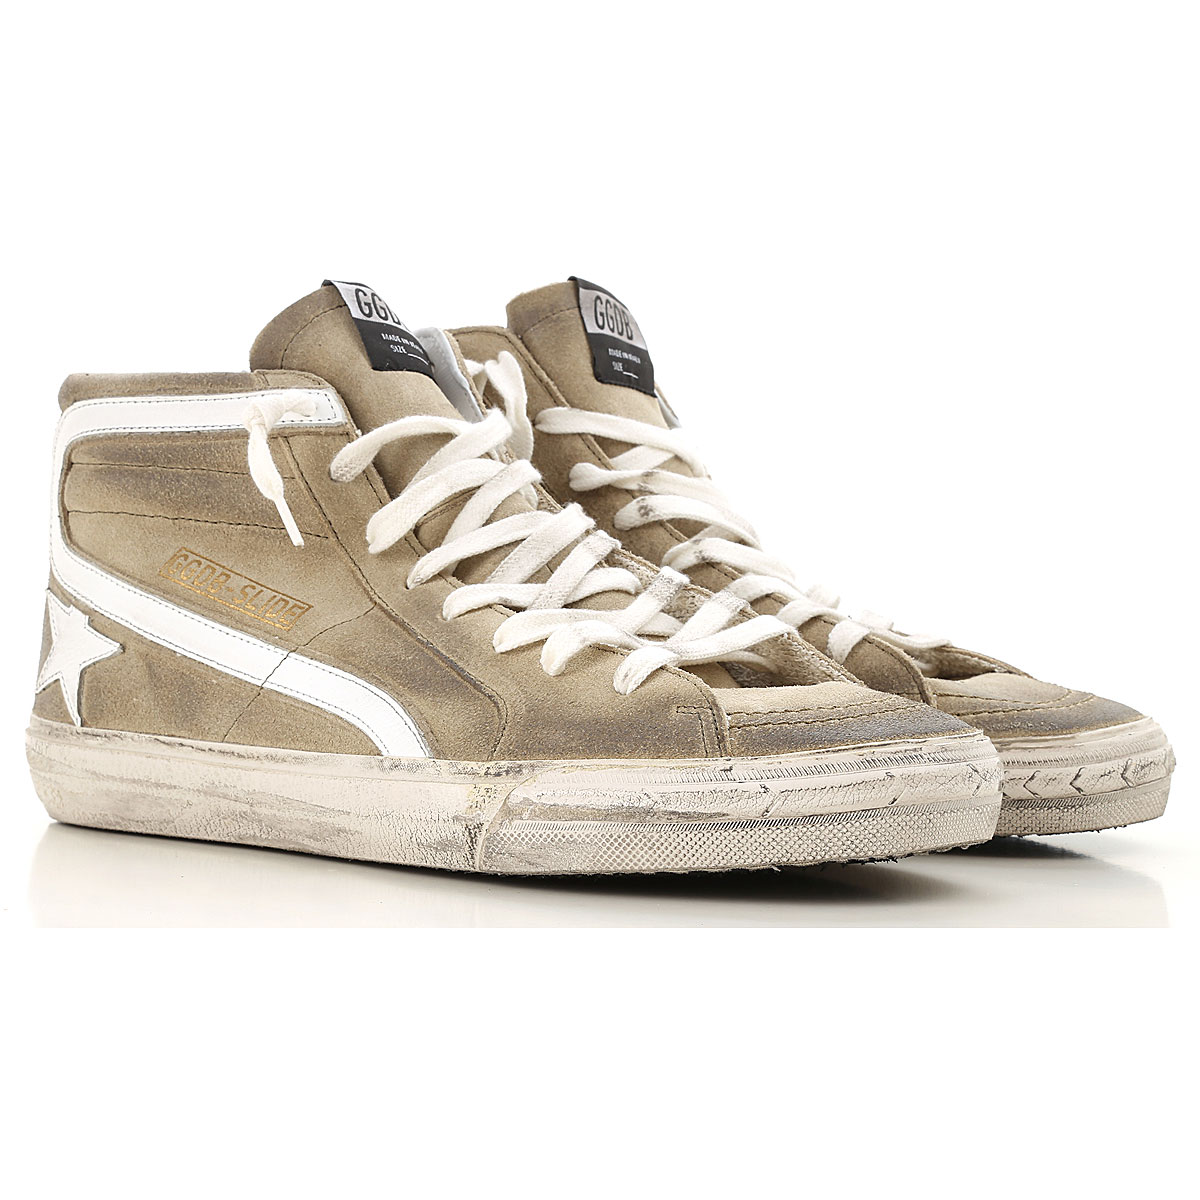 Mens Shoes Golden Goose, Style code: g34ms595-a20-